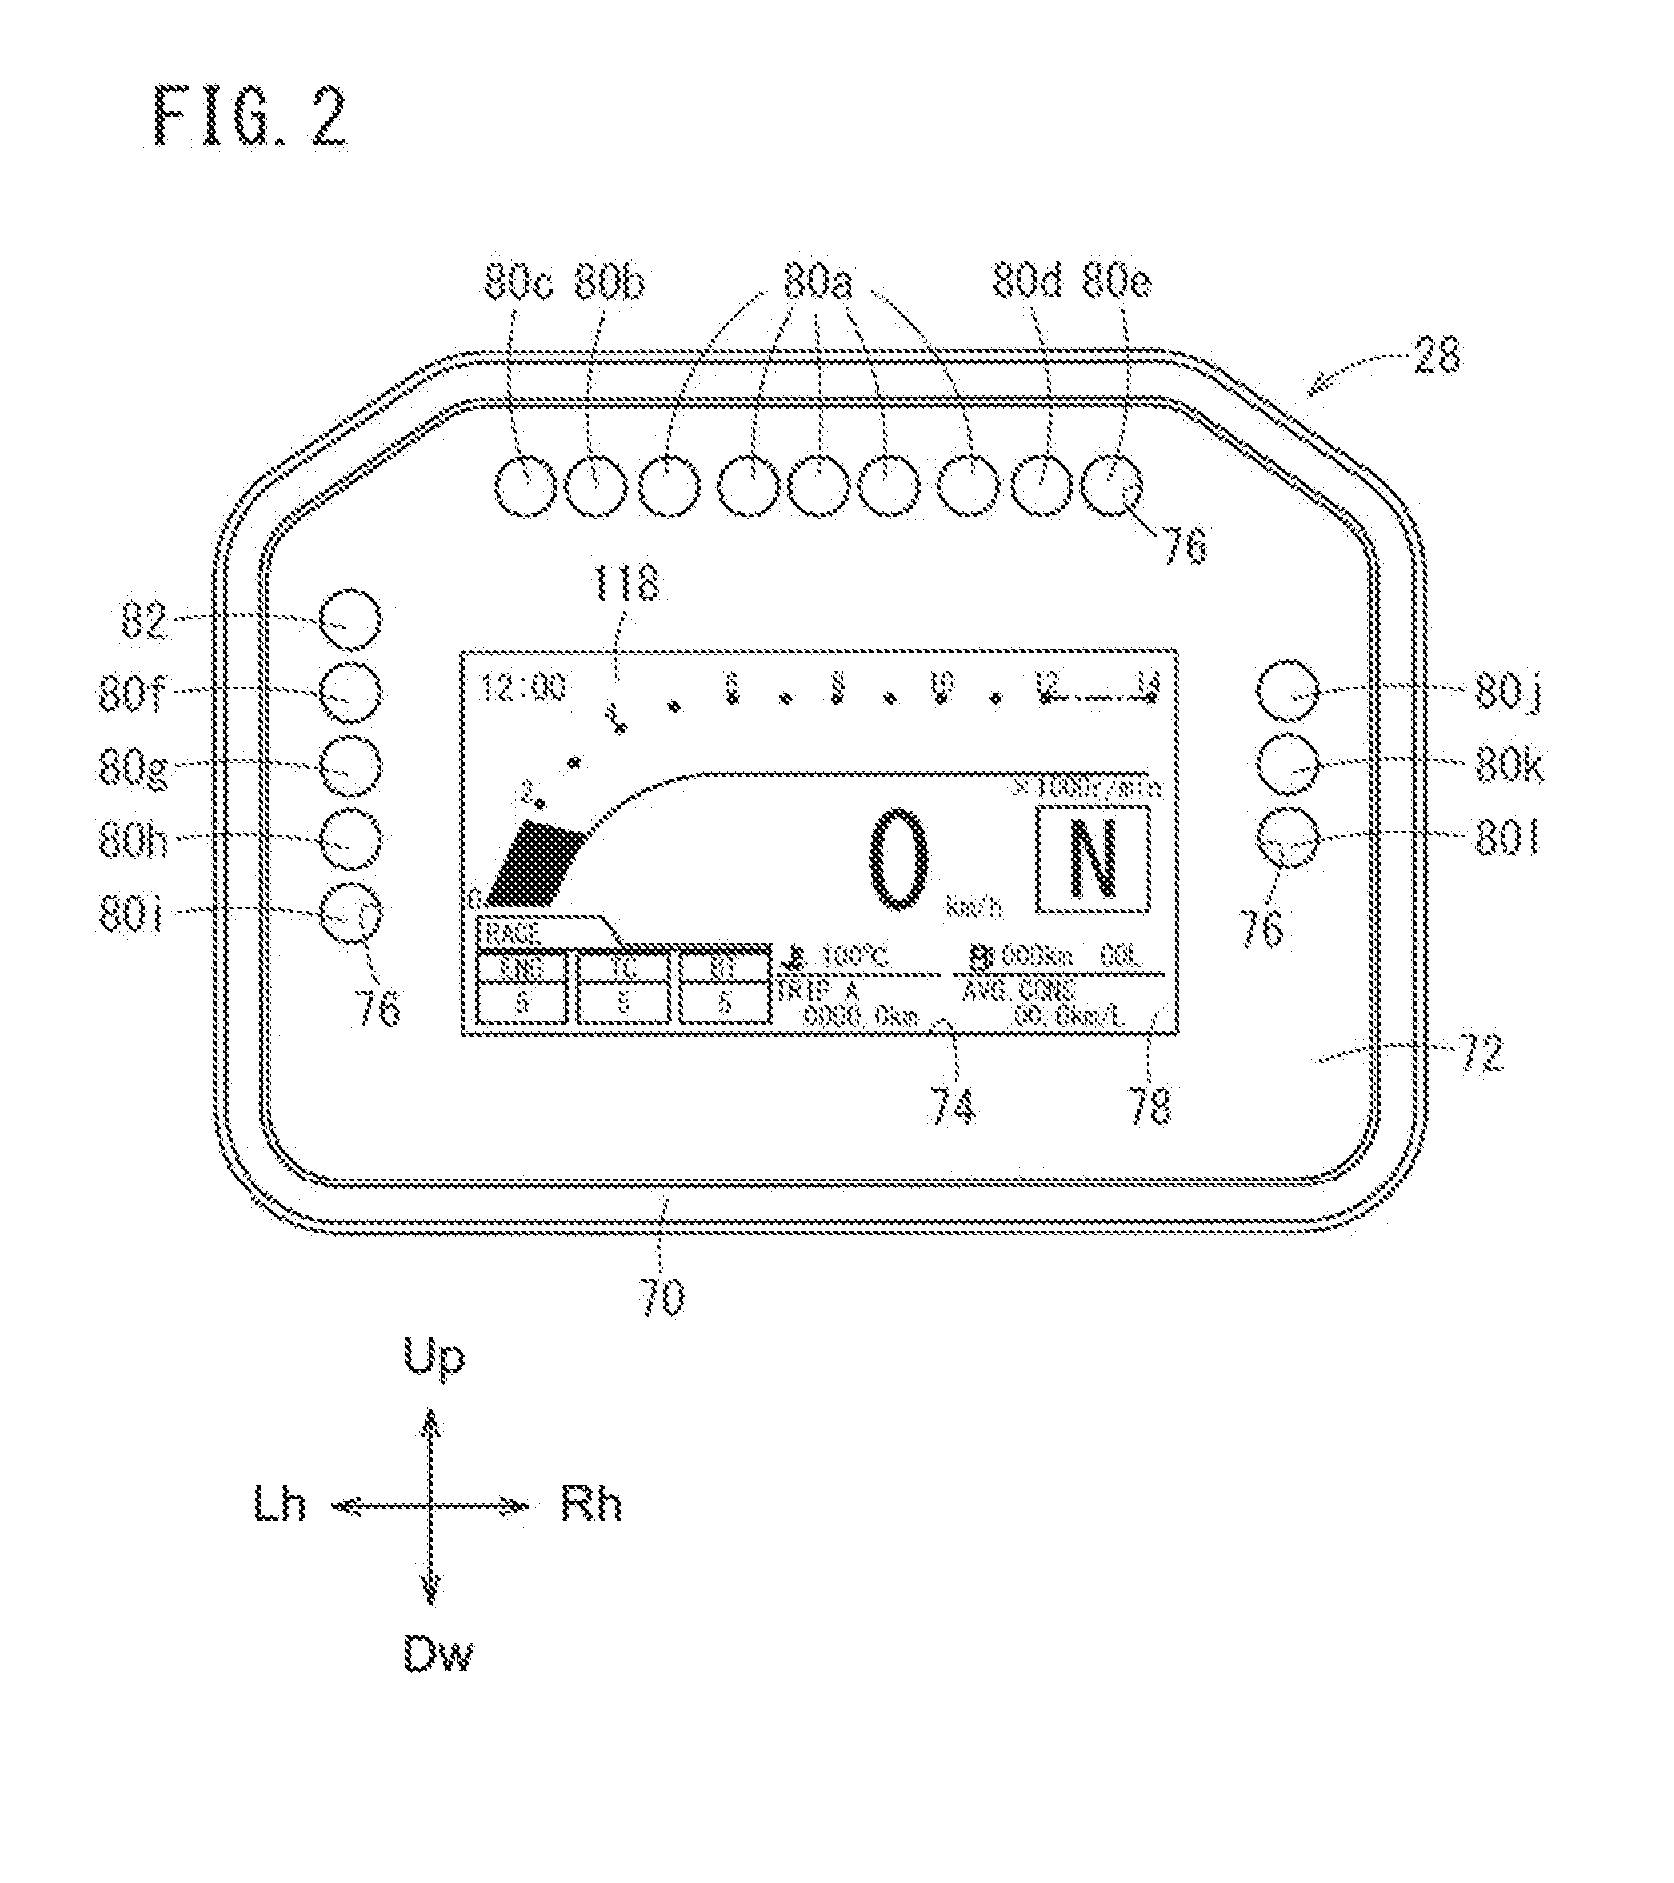 Liquid crystal display device, motorcycle including same, and method of using same